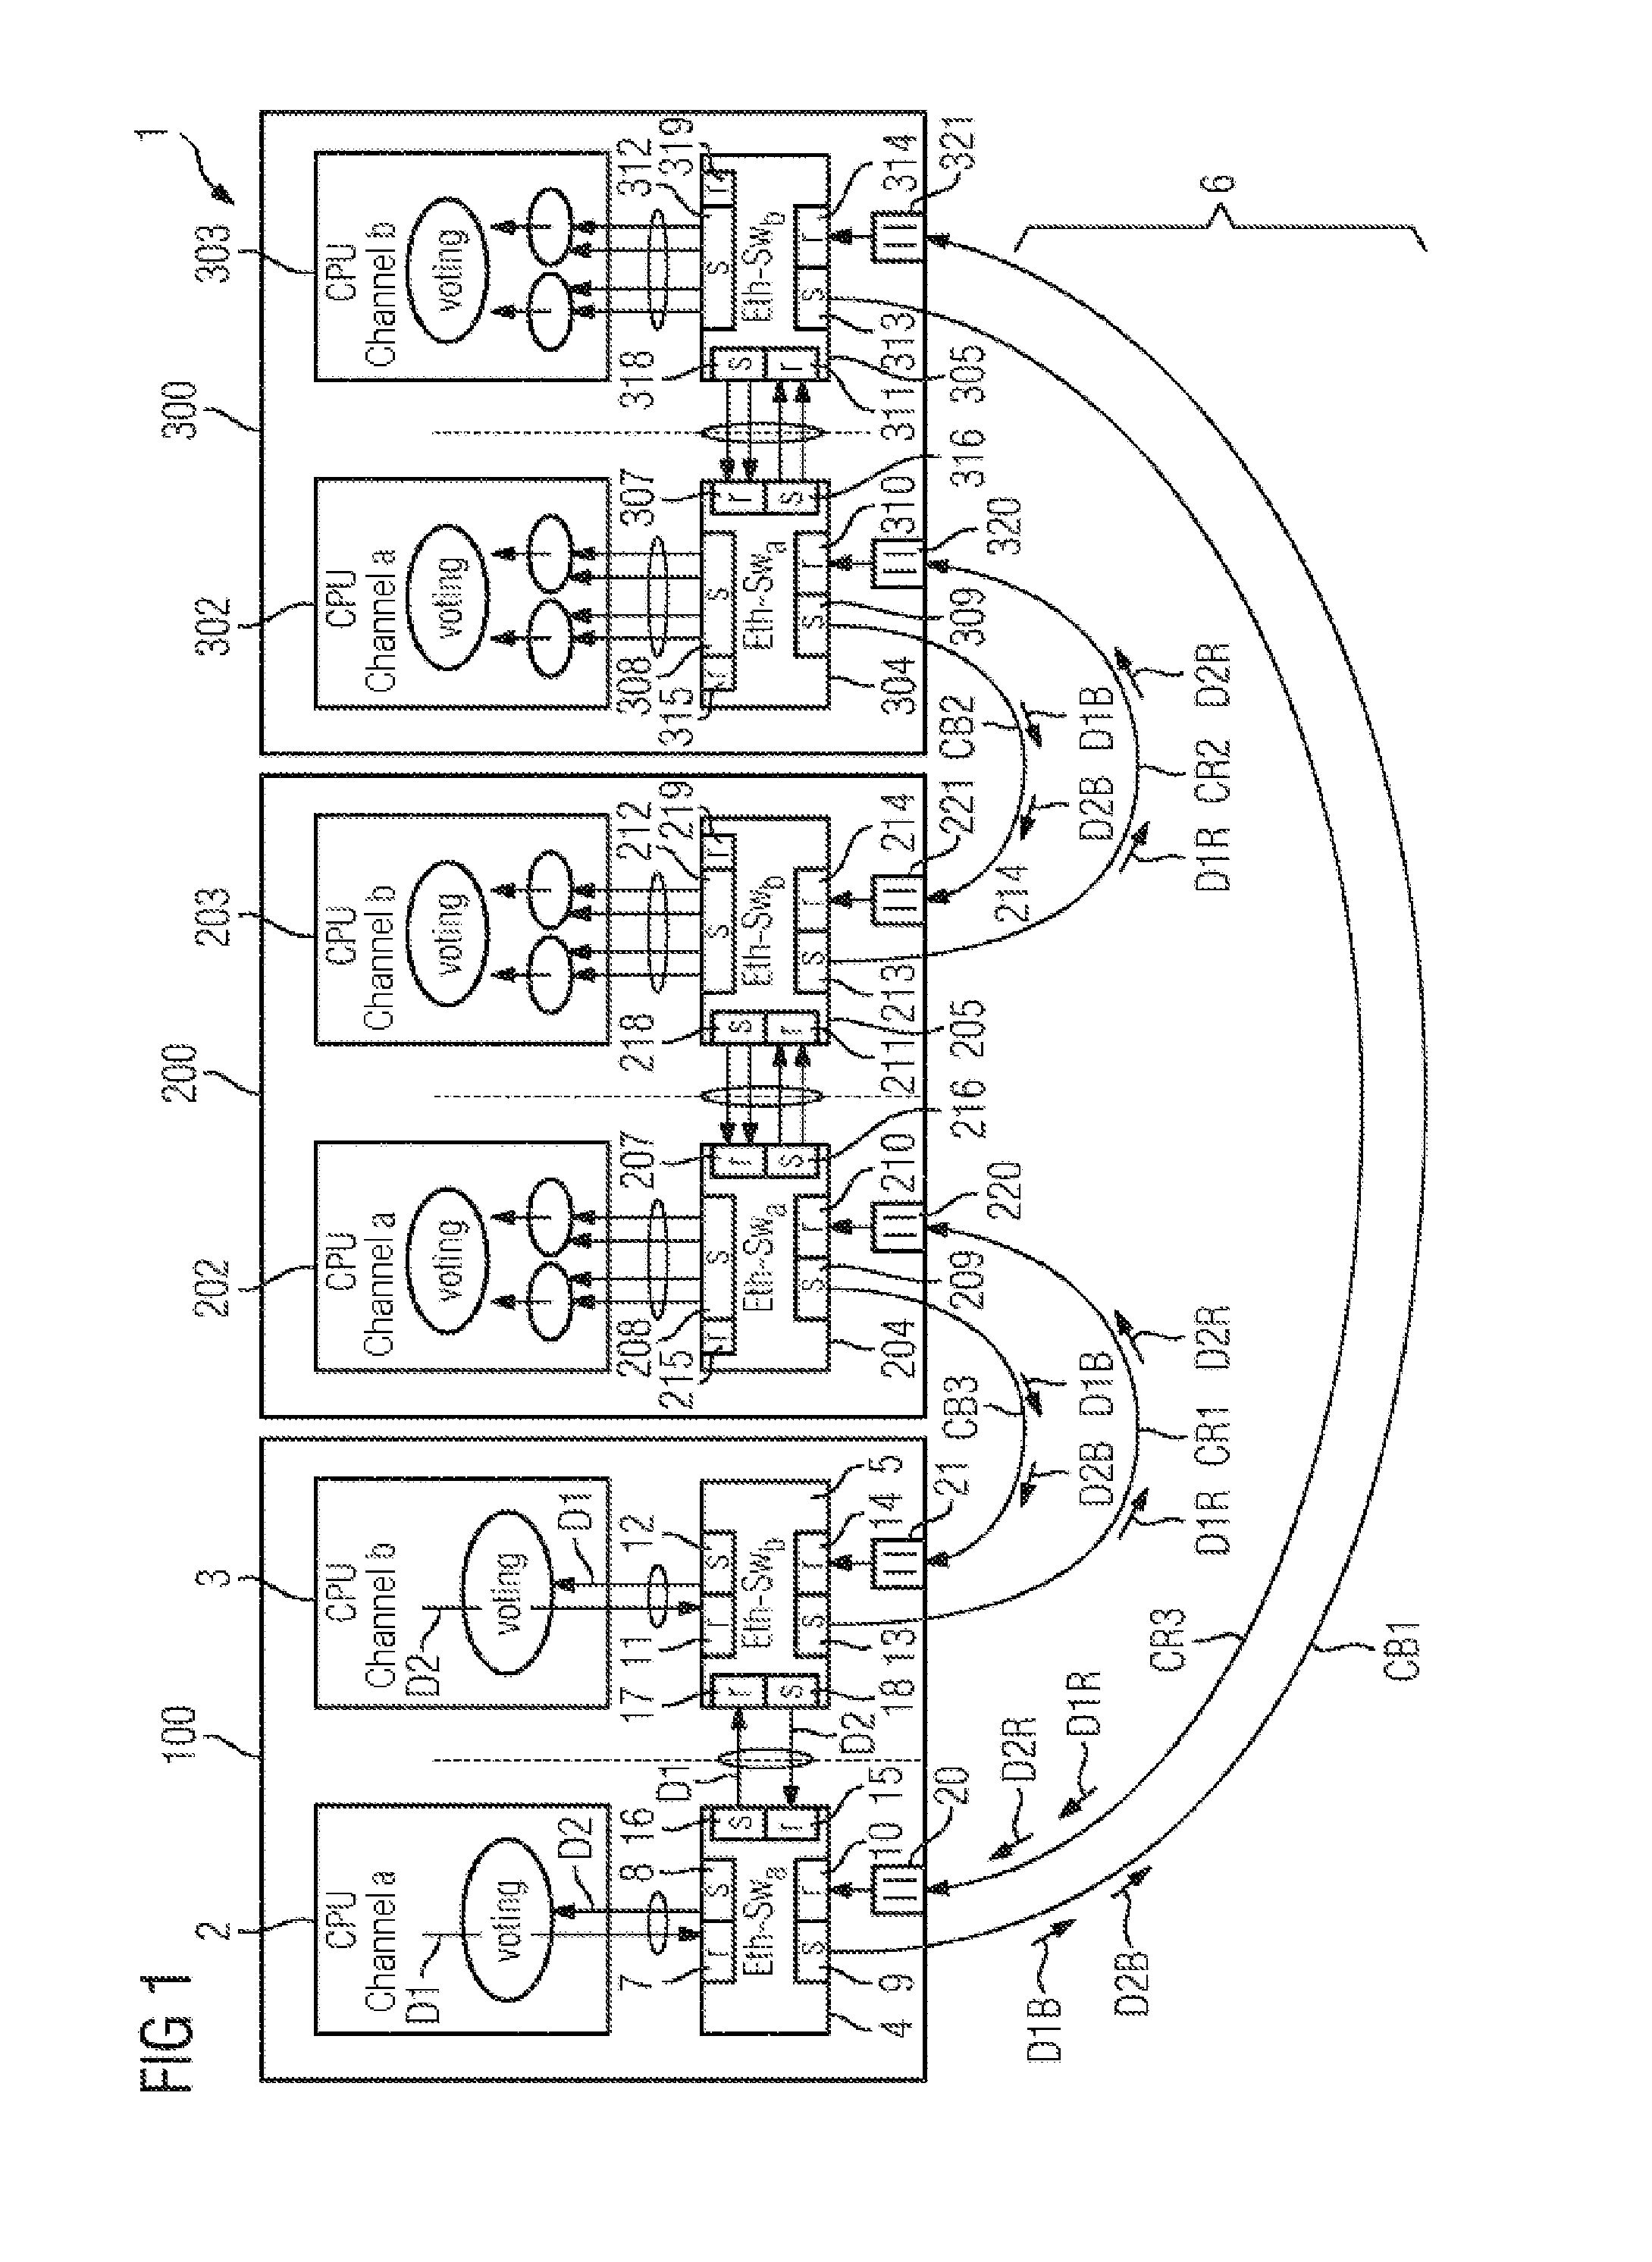 Method for operating a communications network and network arrangement